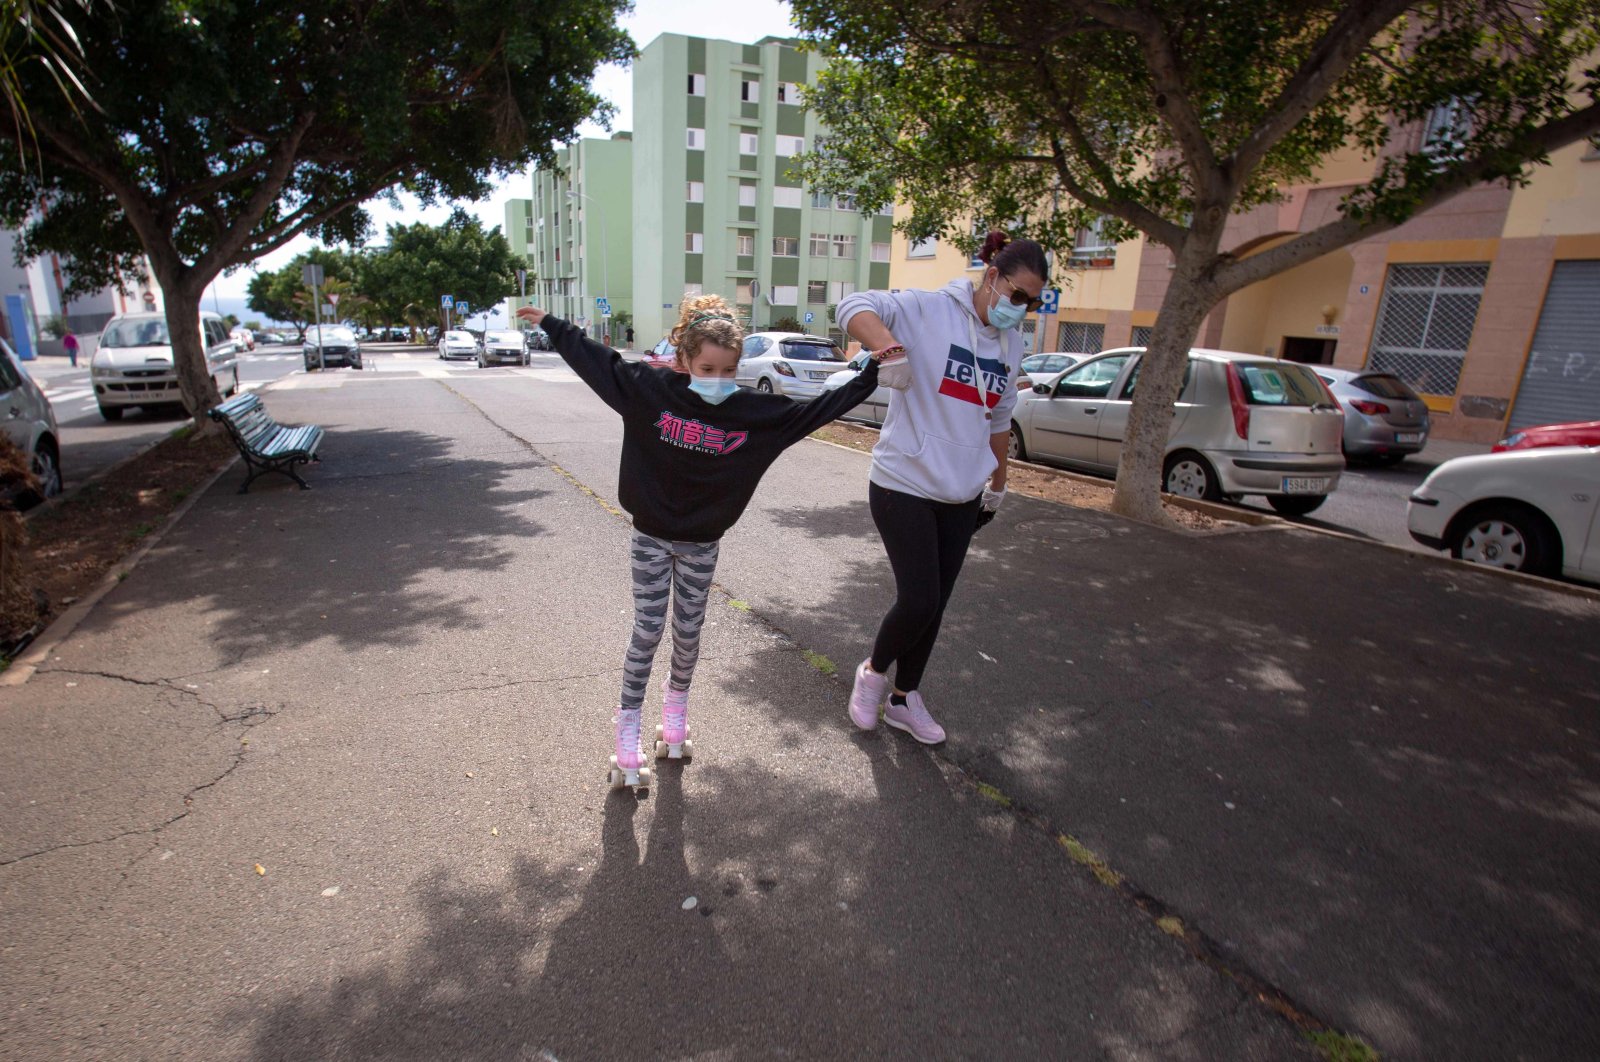 Vera, 10, is helped by her mother Rosi as she skates, during a national lockdown to prevent the spread of the COVID-19 disease, in Santa Cruz de Tenerife, Spain, April 26, 2020. (AFP Photo)